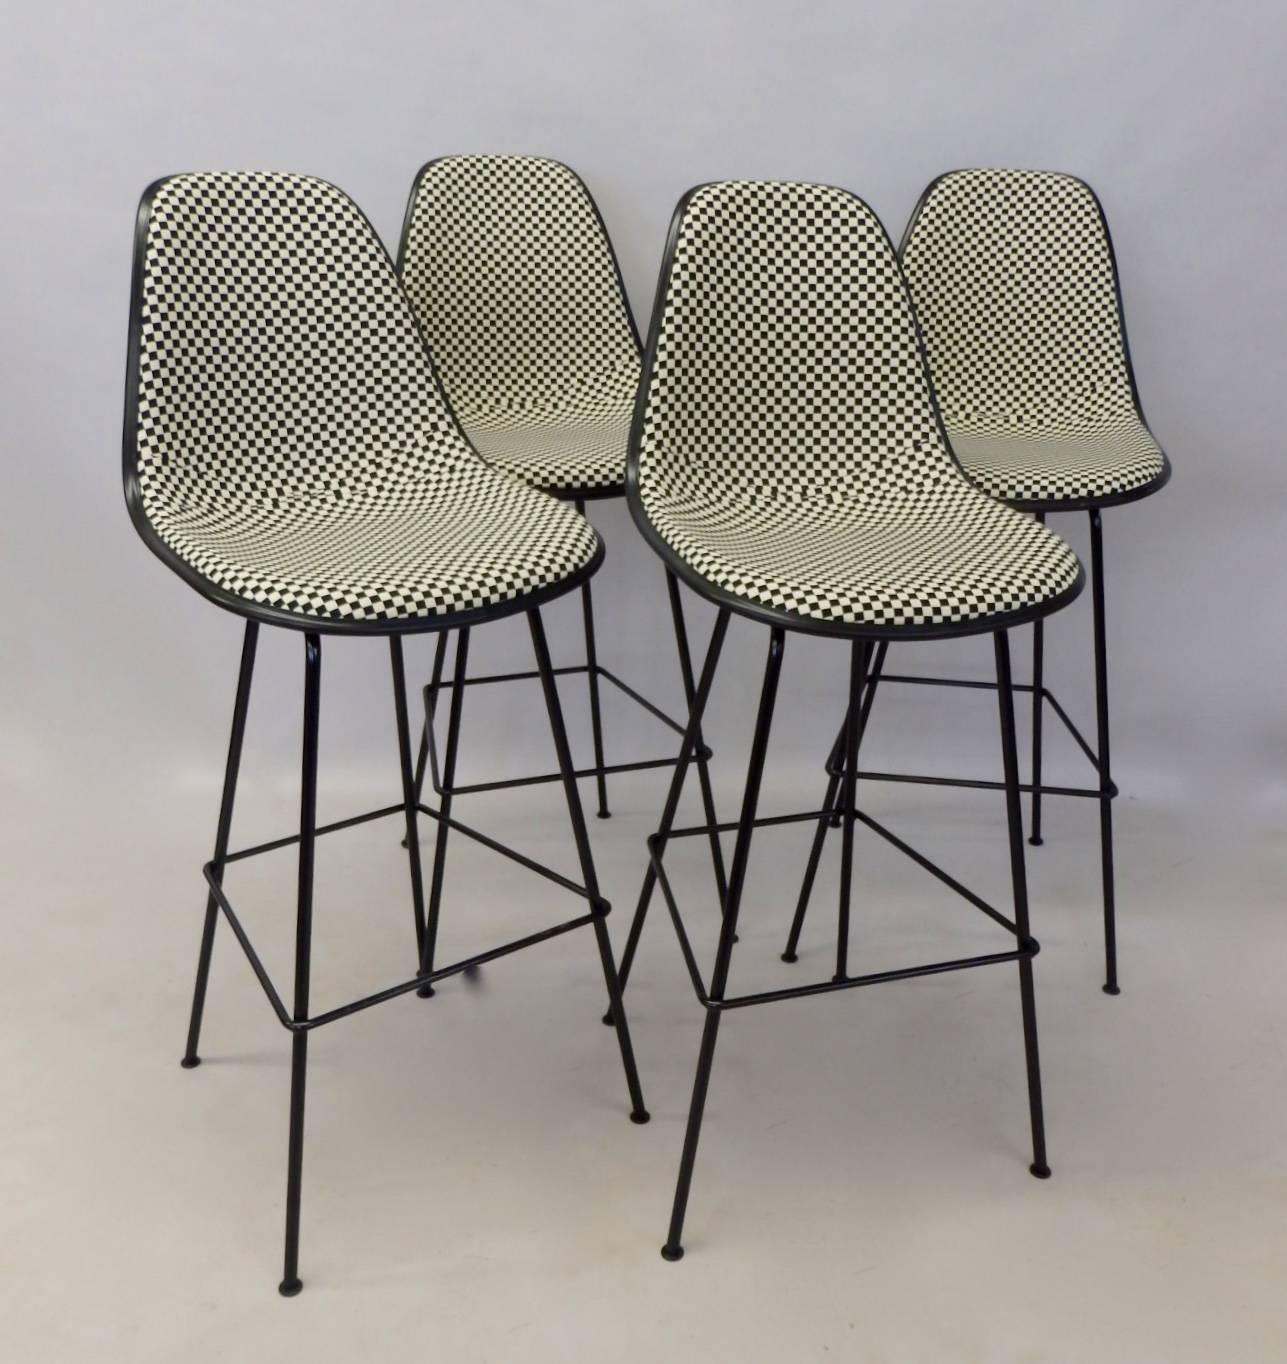 American Four Eames Herman Miller Bar Stools with Girard black white Checkerboard Fabric